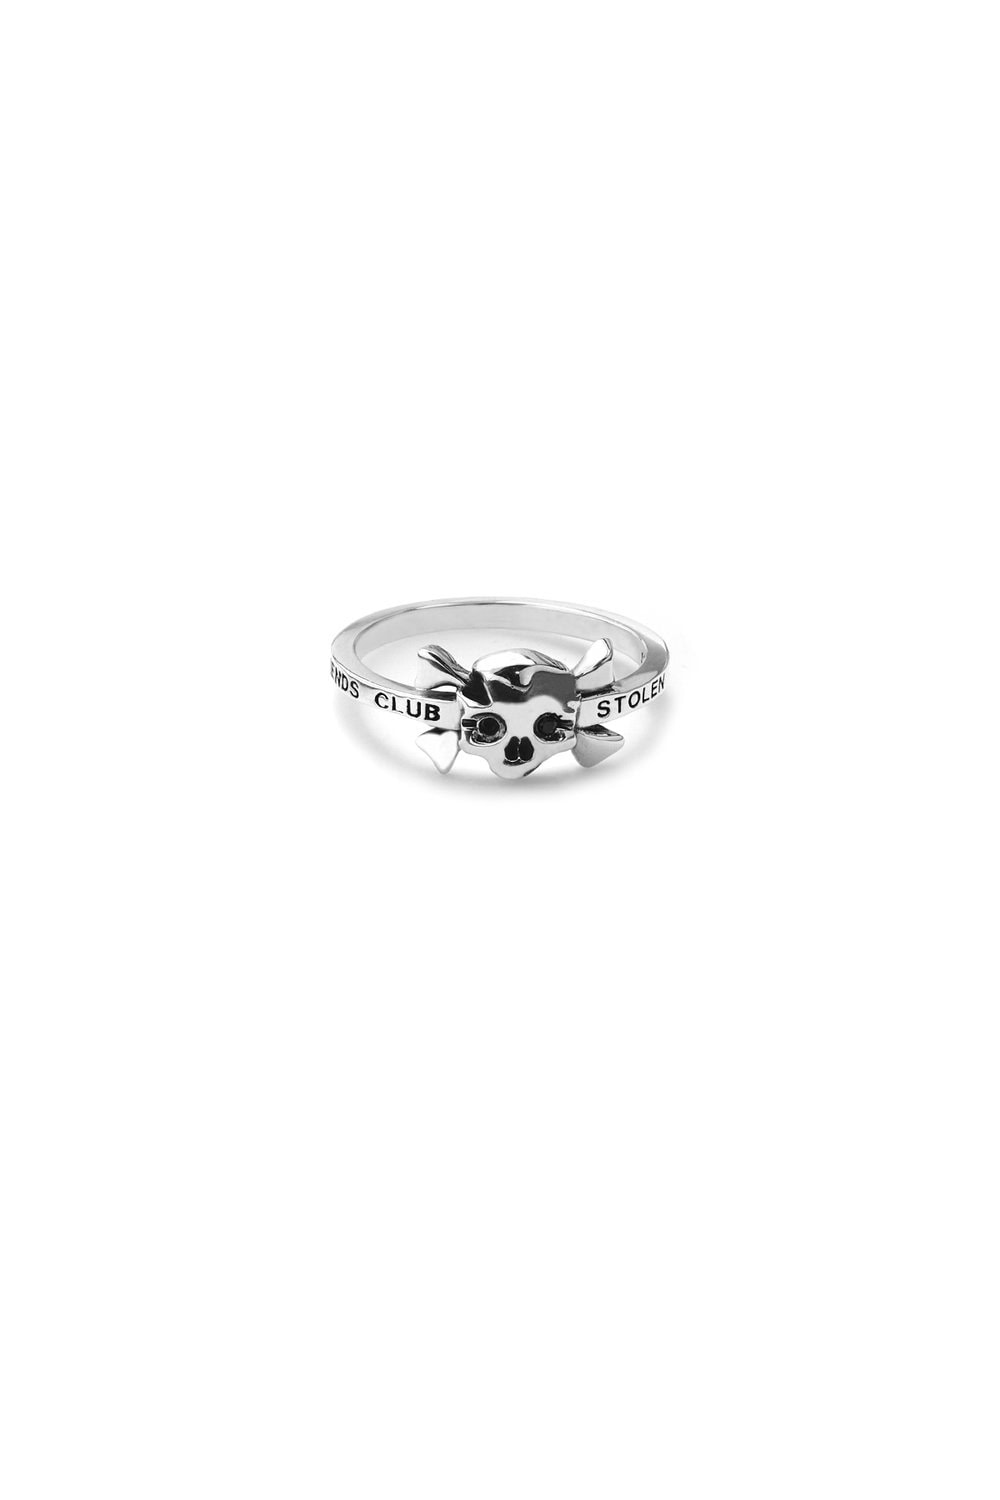 Stolen Girlfriends Club Pirate Flag Ring Sterling Silver_0